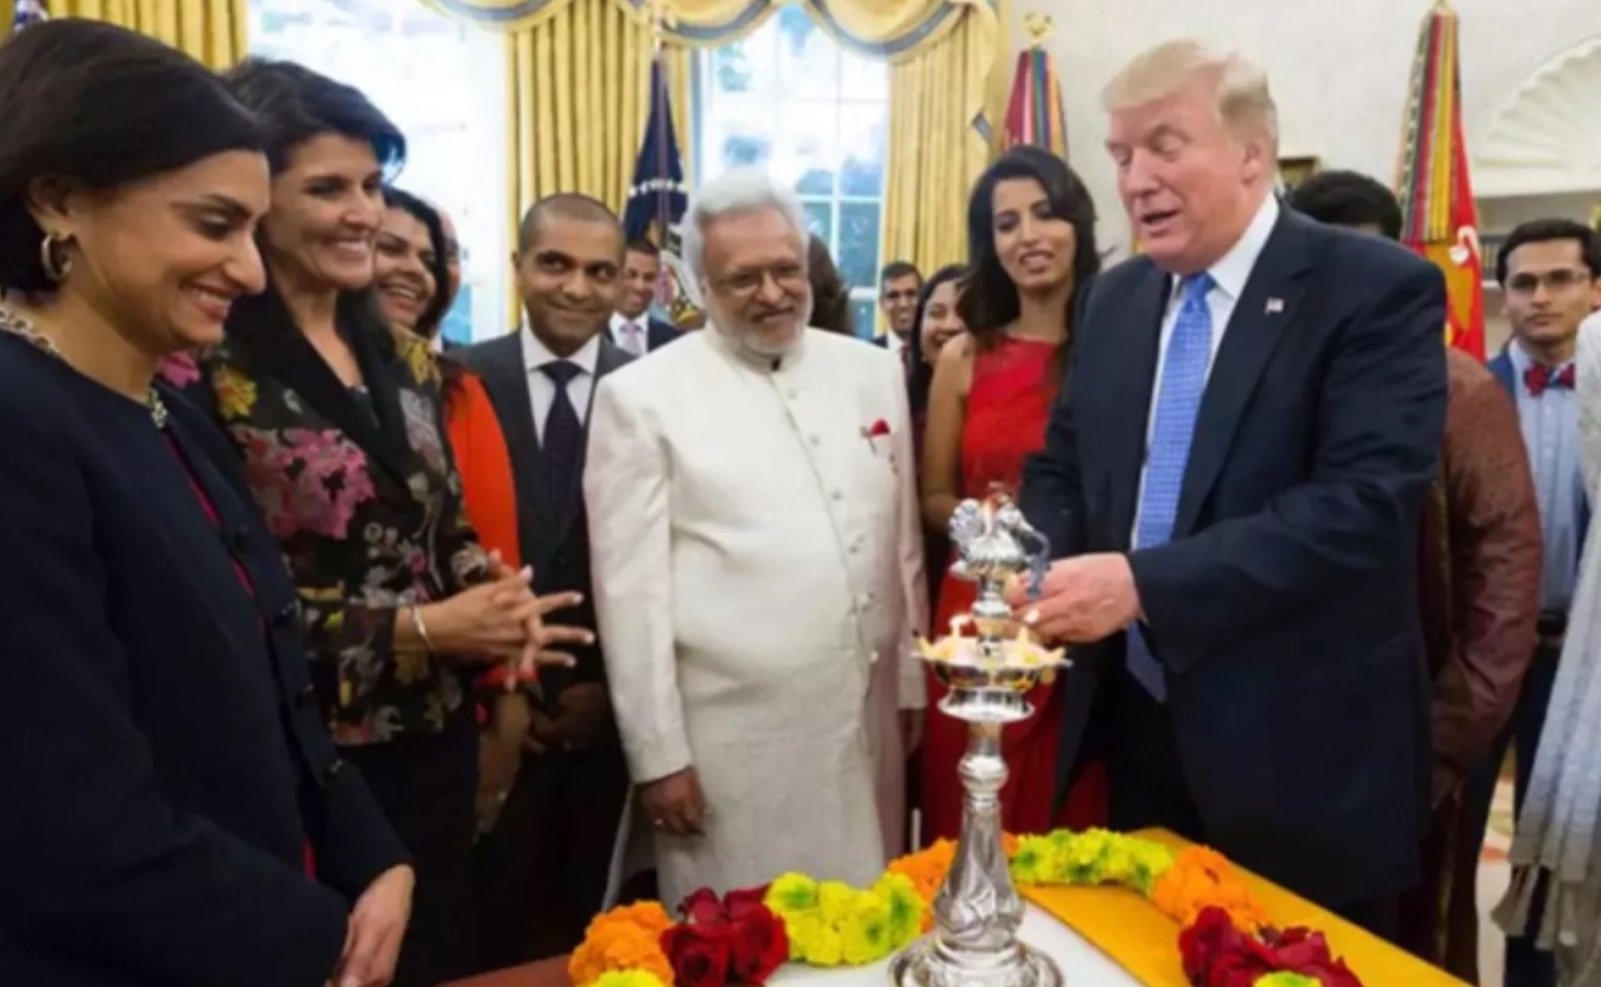 80% Indian-Americans or Hindus are changing Political affiliation - Kreately